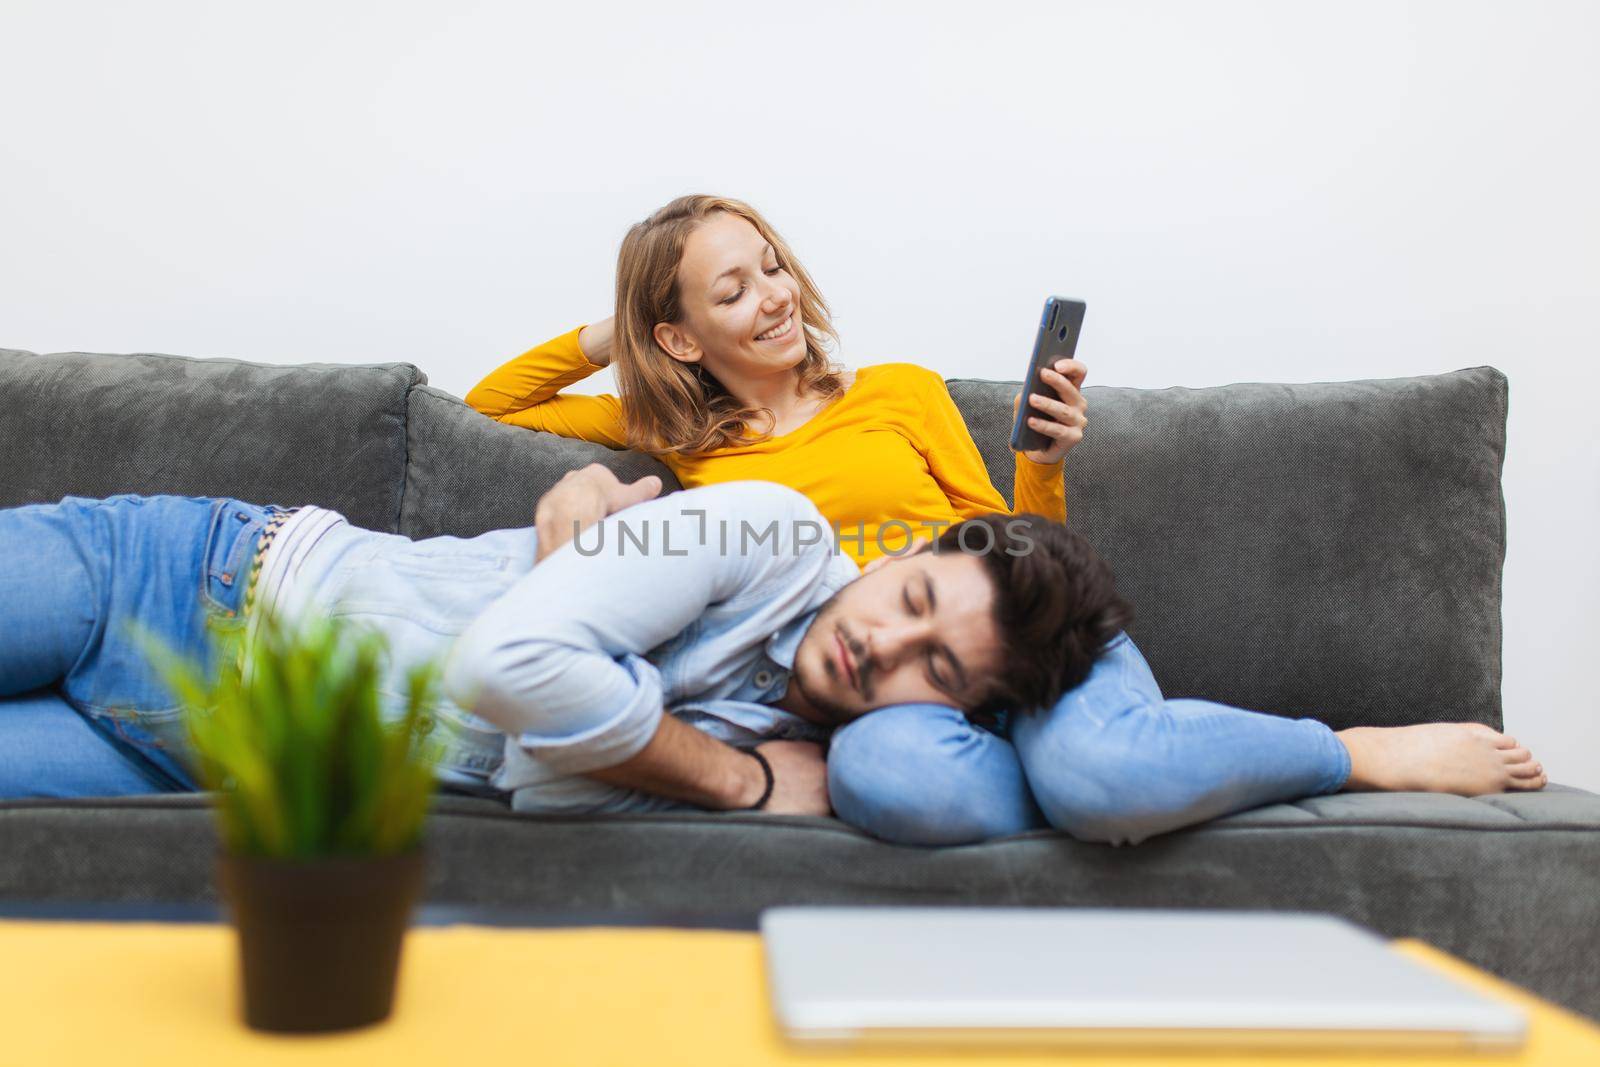 boy naps on girlfriend's lap while she looks at smart phone by kokimk